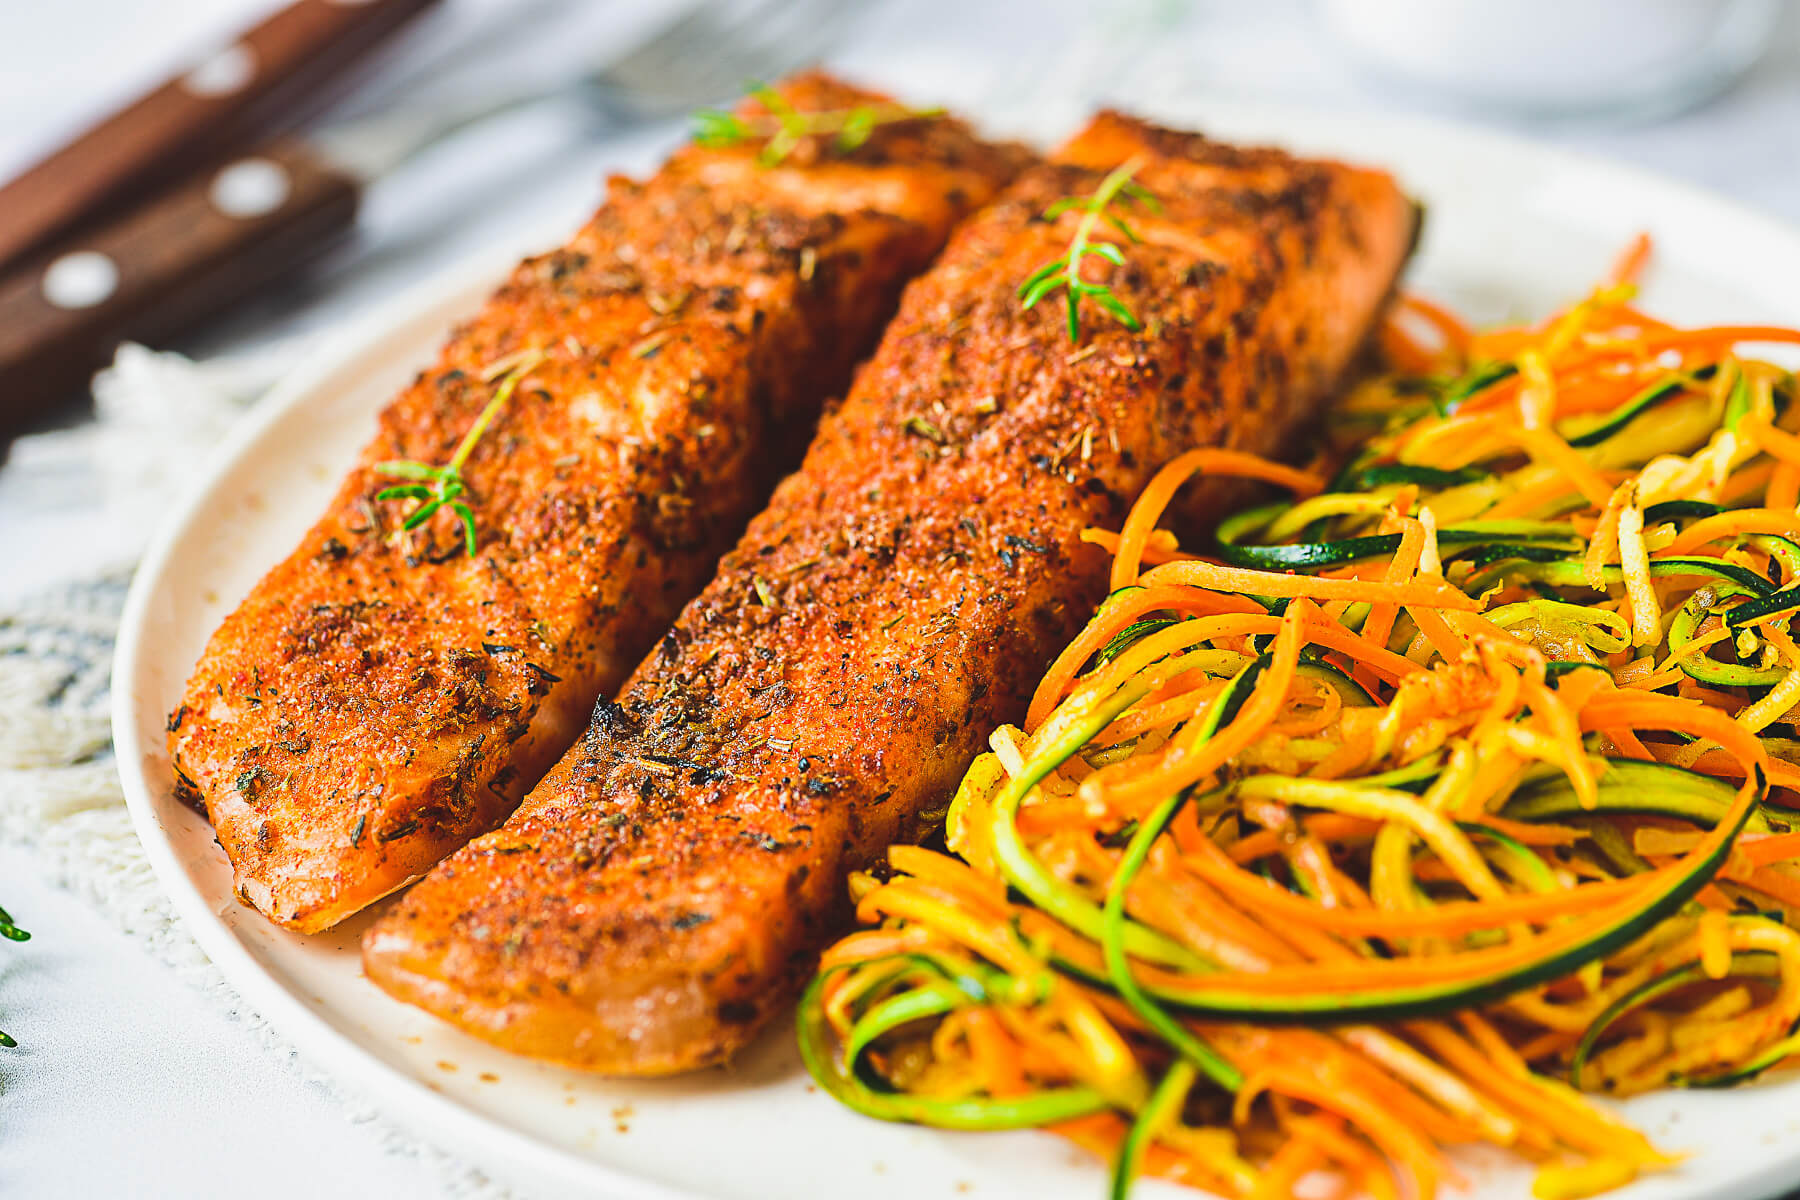 Two cooked spiced salmon fillets on a plate beside spiralized vegetables.